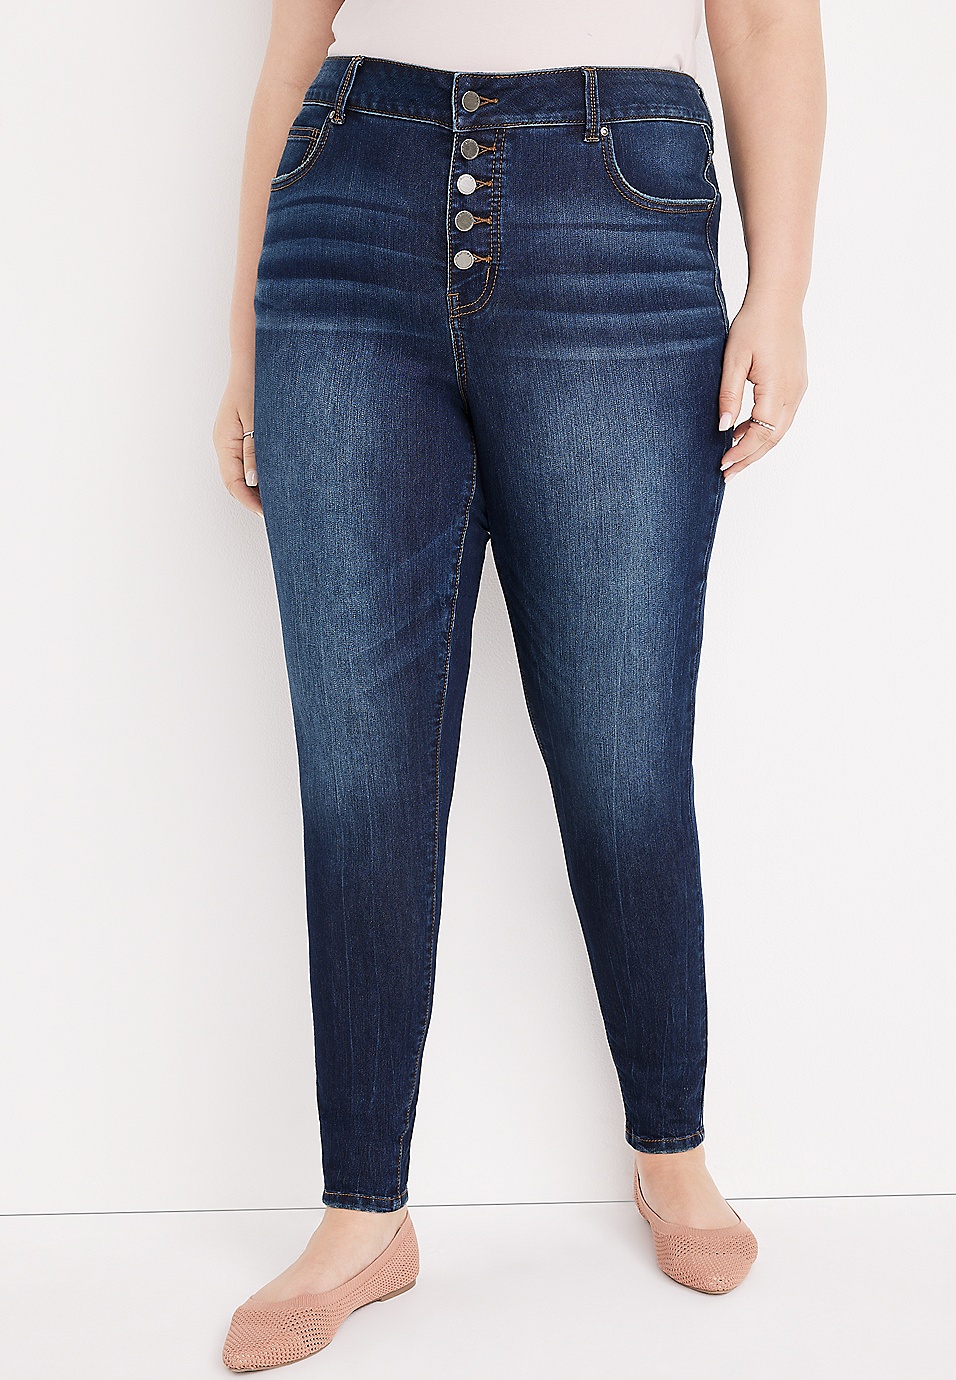 m jeans by maurices™ Everflex™ Super Skinny Side Panel Maternity